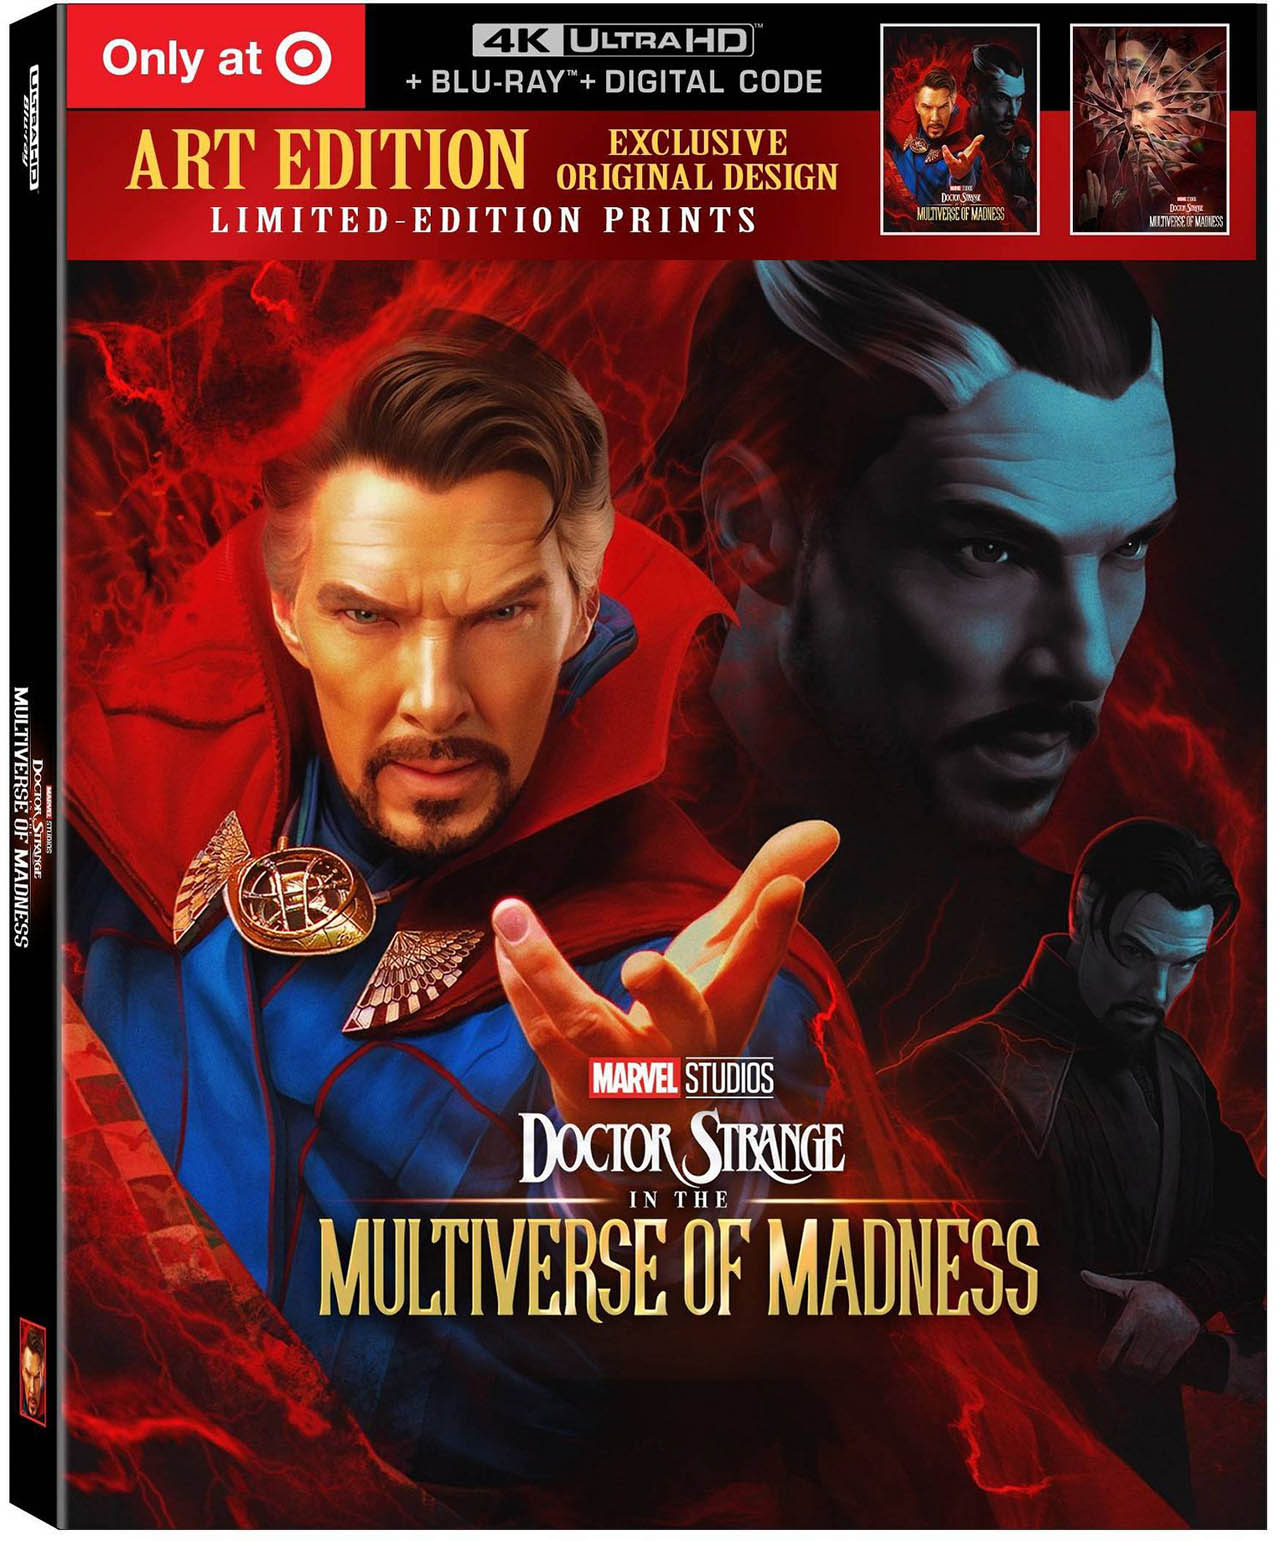 Doctor Strange in the Multiverse of Madness 4k Blu-ray Target Exclusive